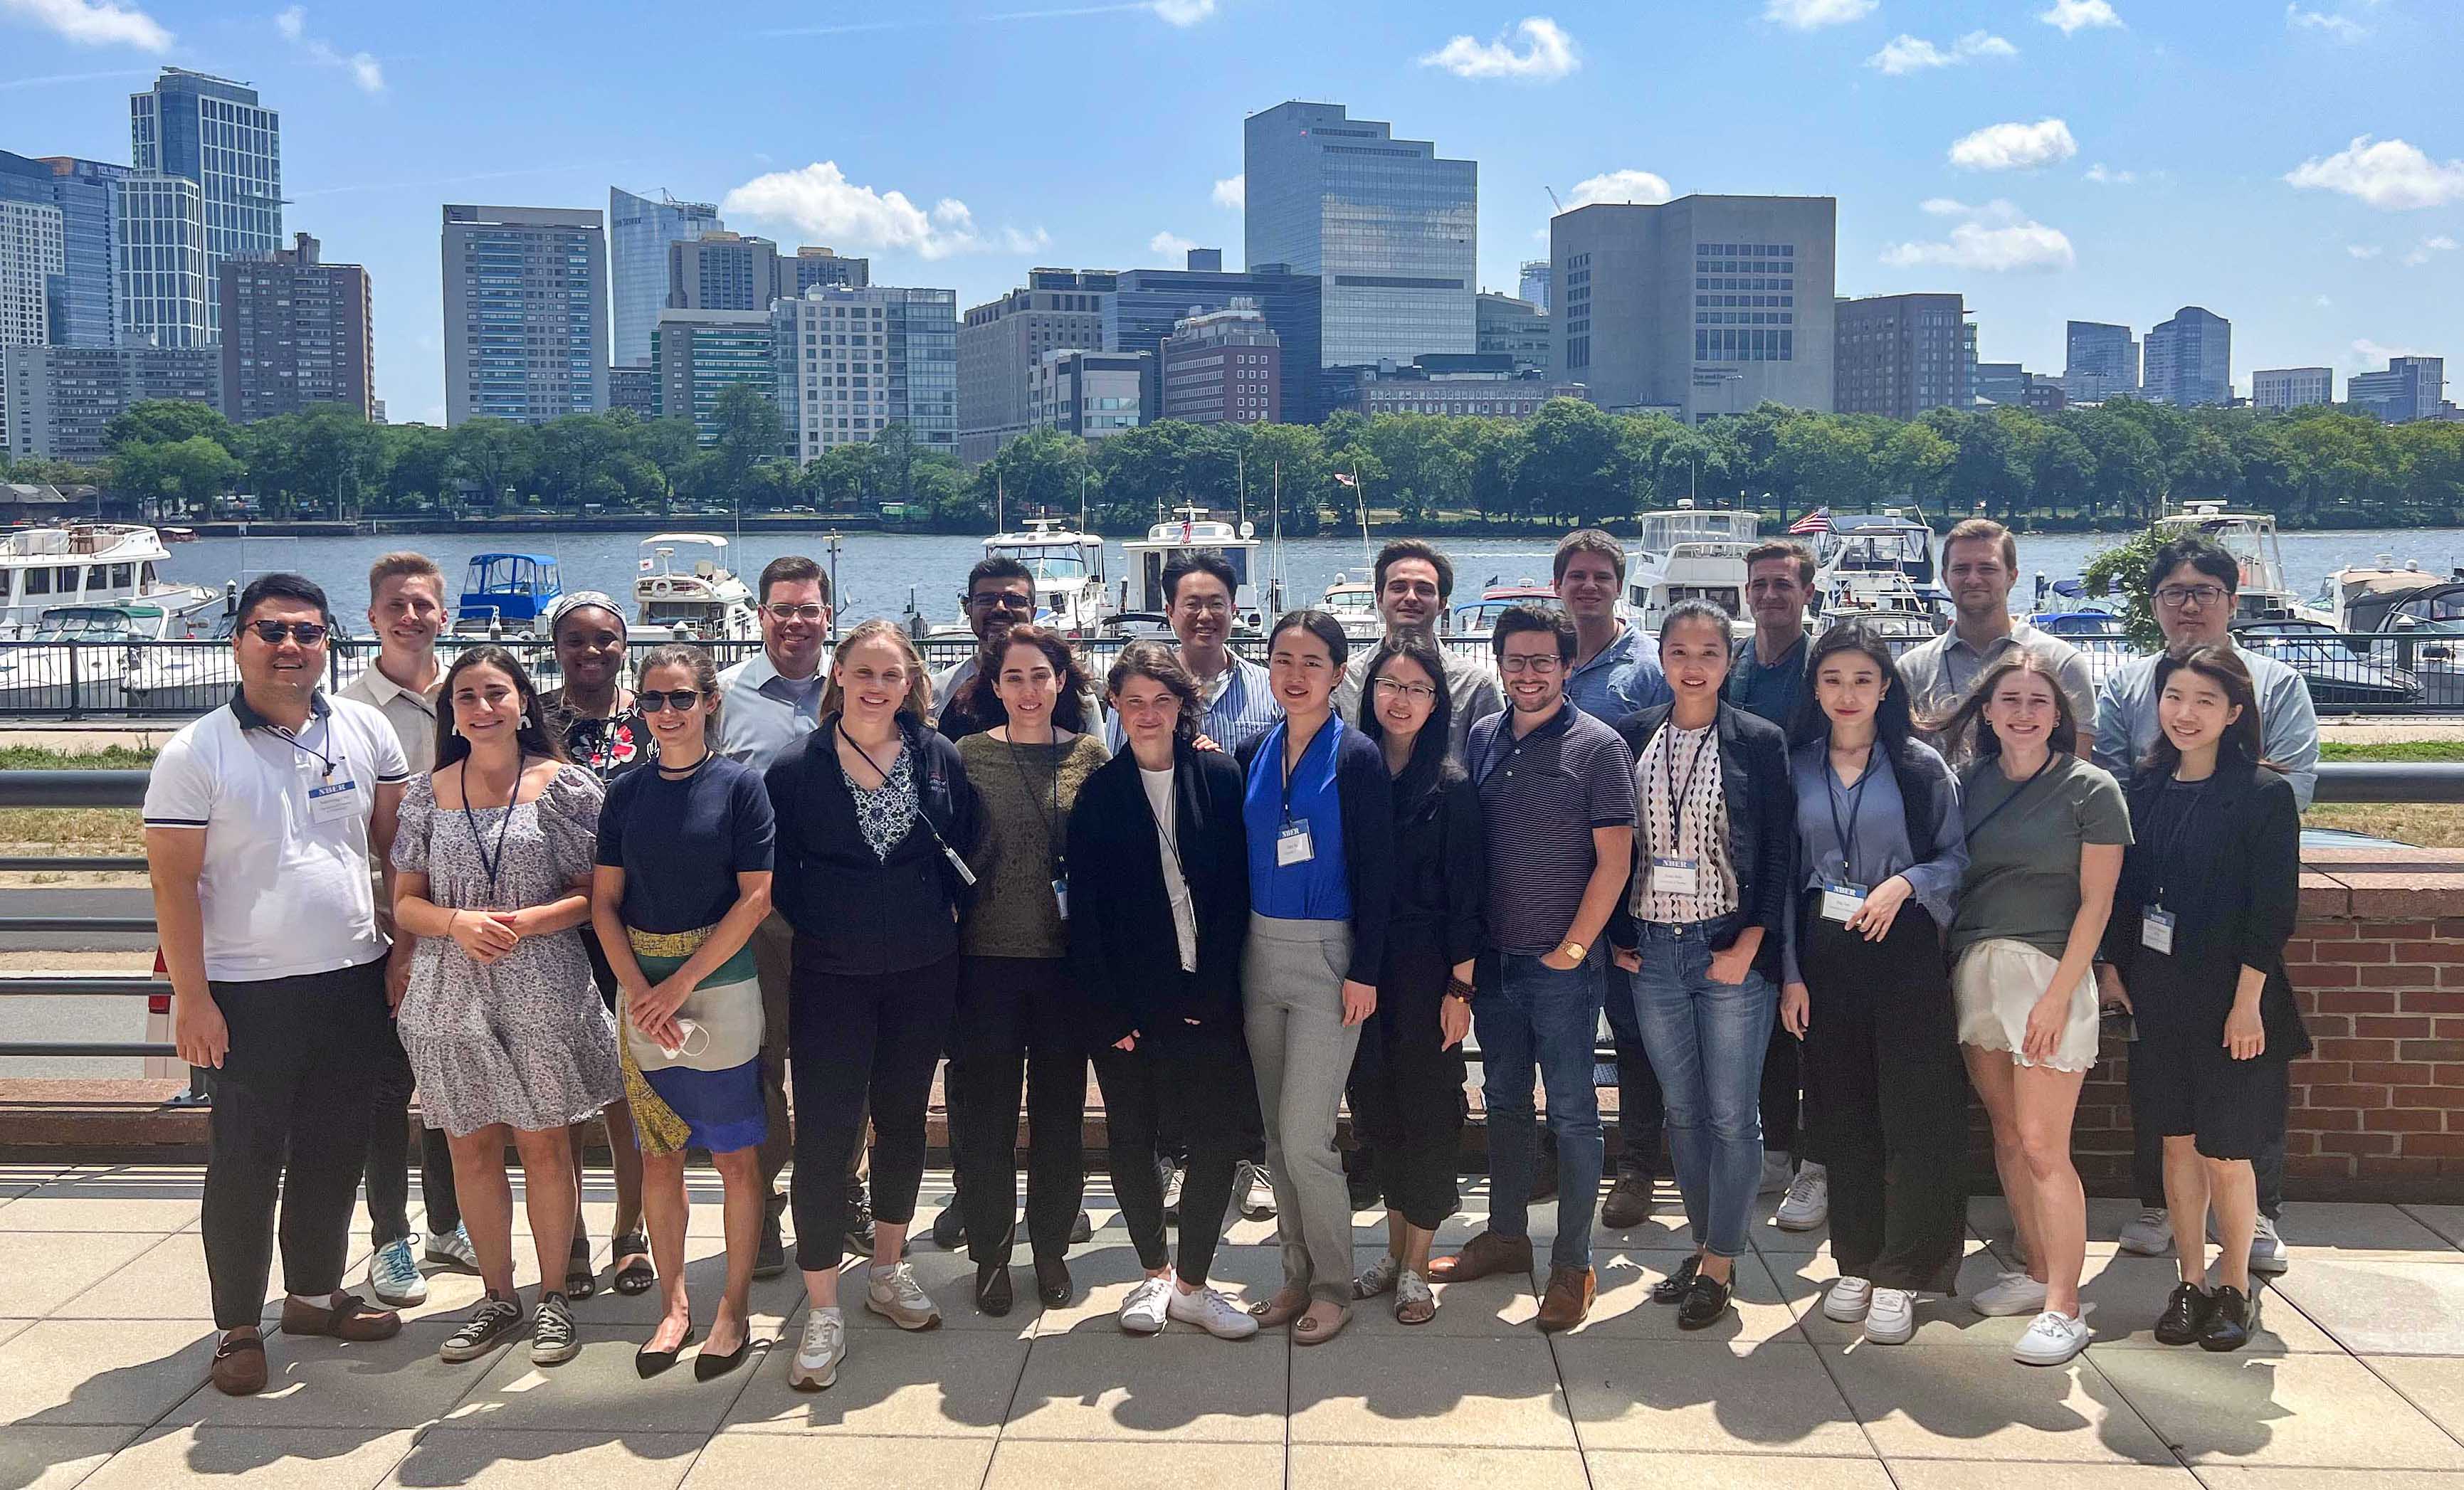 Group Photo of participants of NBER Innovation Boot Camp 2022 near the water with the boston skyline behind